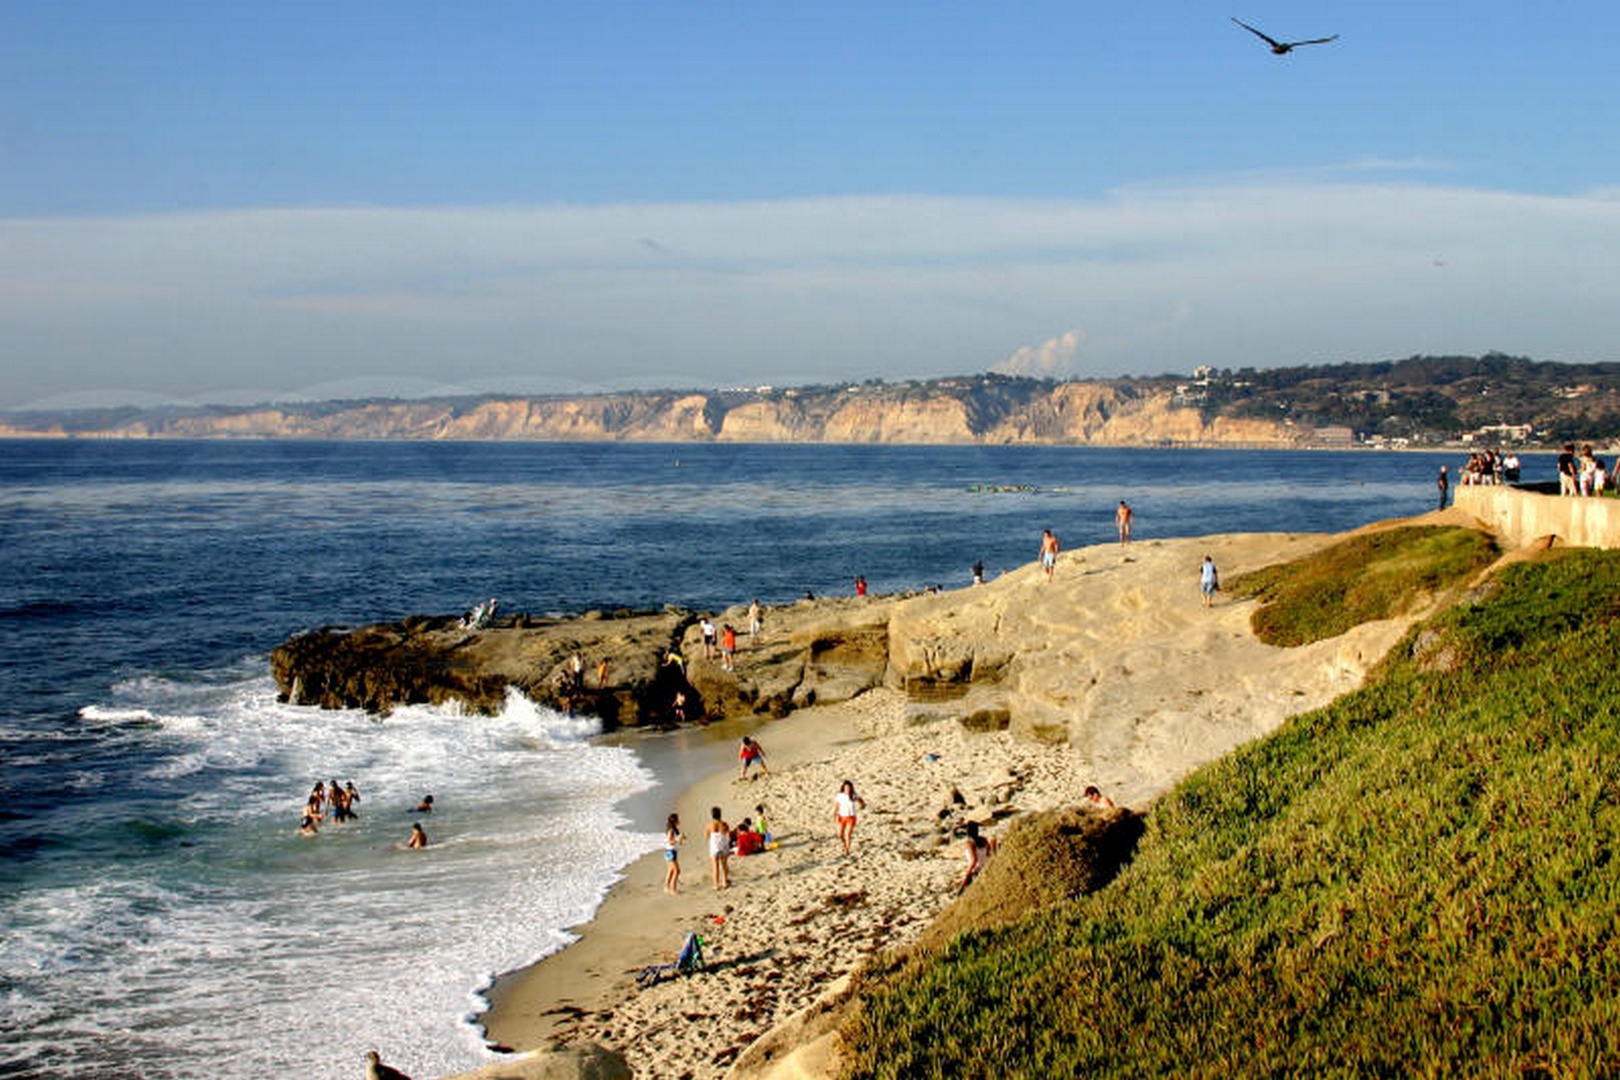 Beach and cliffs of Torrey Pines in the distance